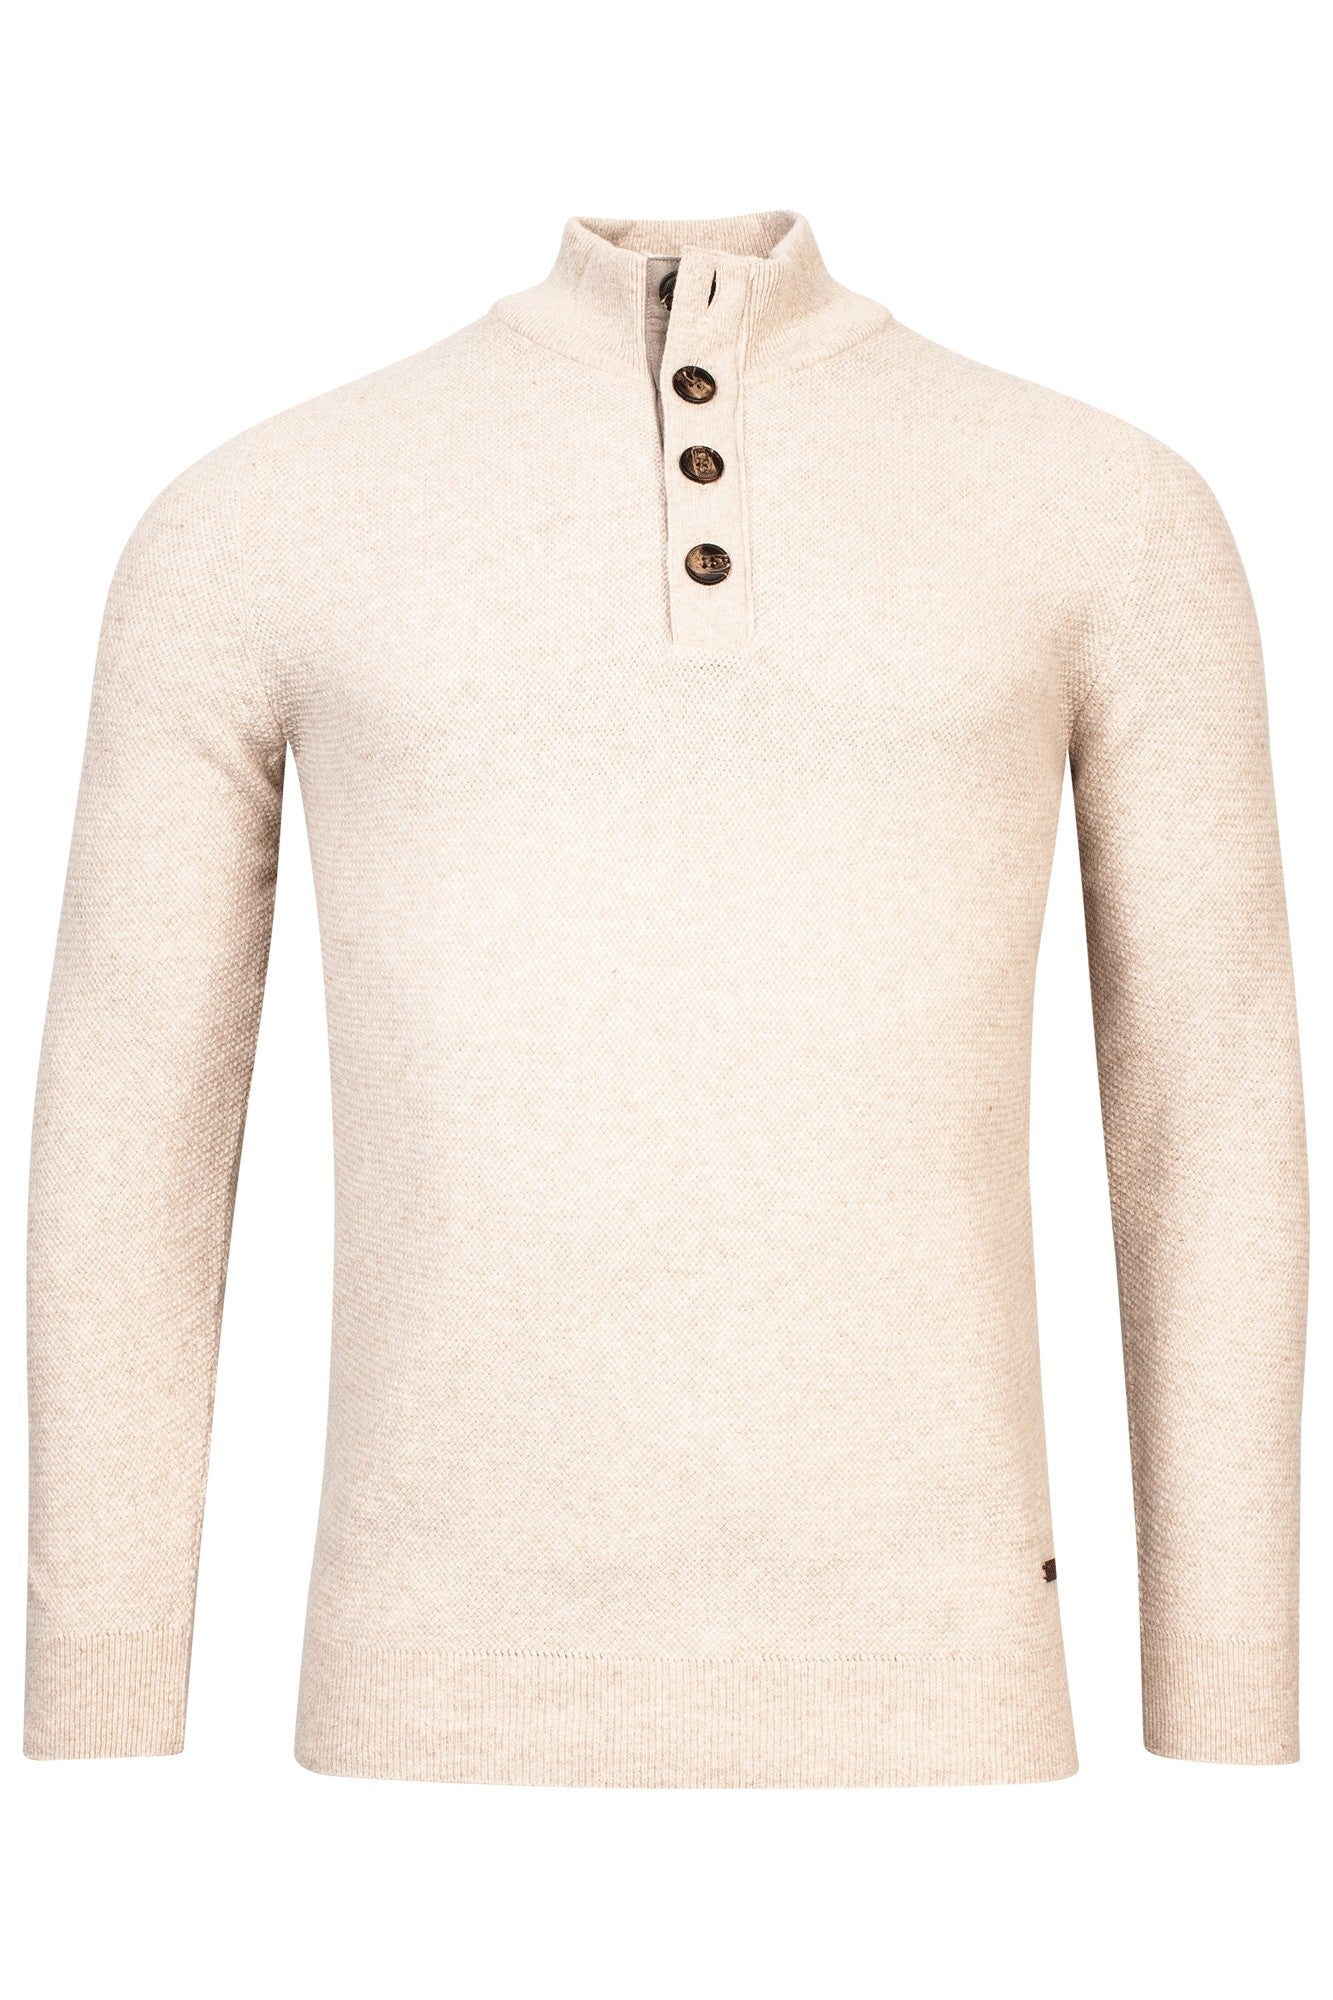 Giordano Half Button – Beige Claytons Quality Sweater Clothing